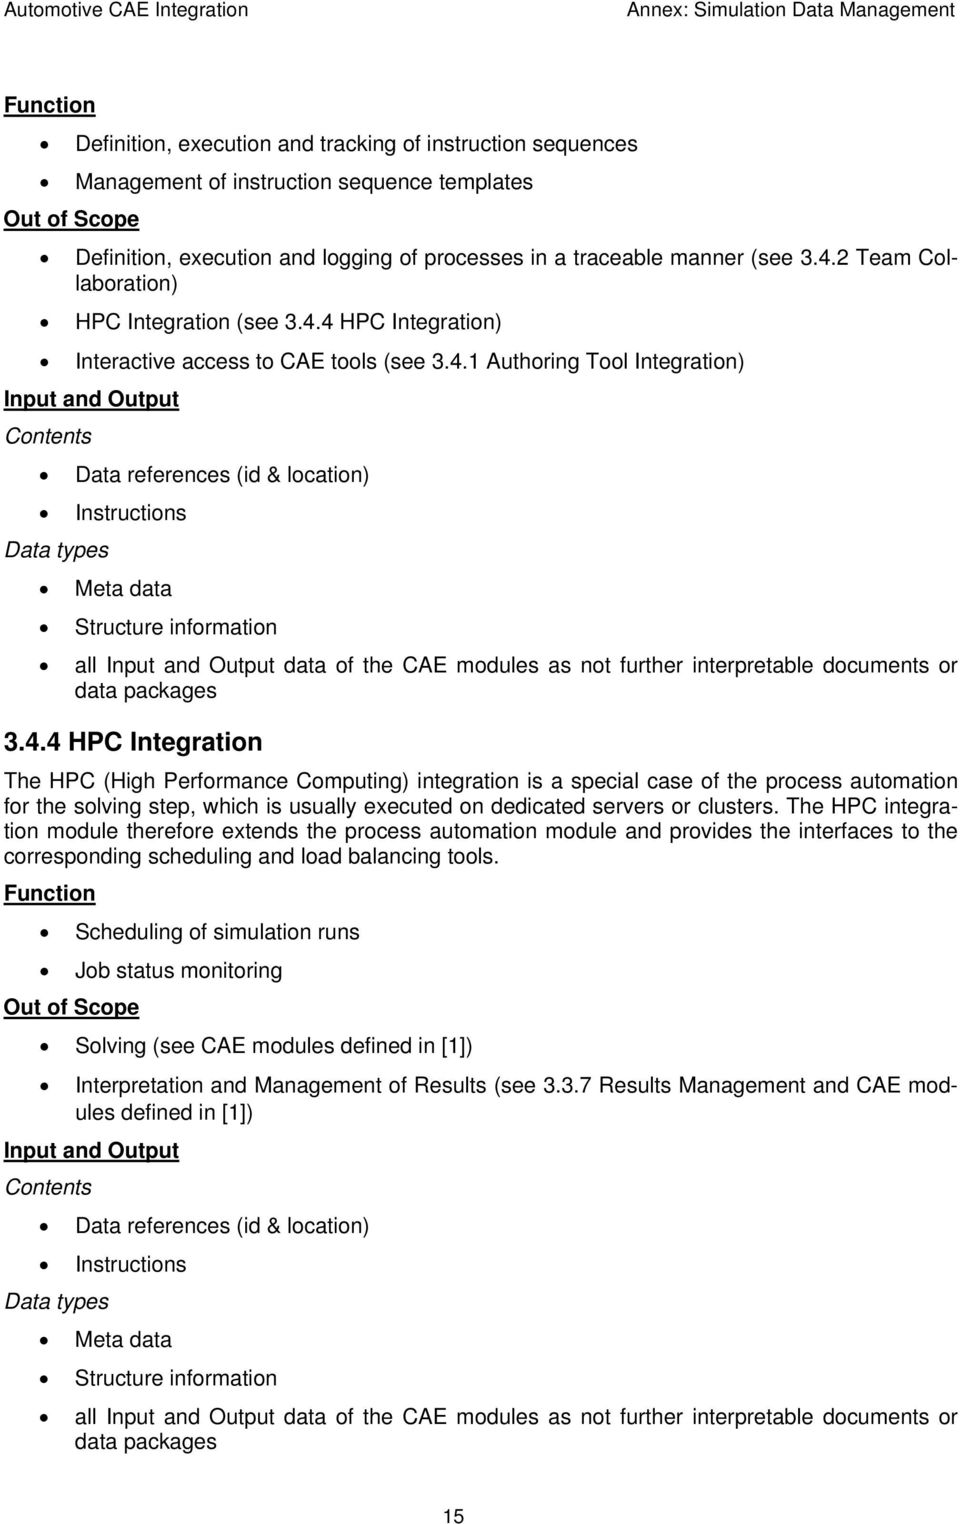 4 HPC Integration) Interactive access to CAE tools (see 3.4.1 Authoring Tool Integration) Input and Output Data references (id & location) Instructions Meta data Structure information all Input and